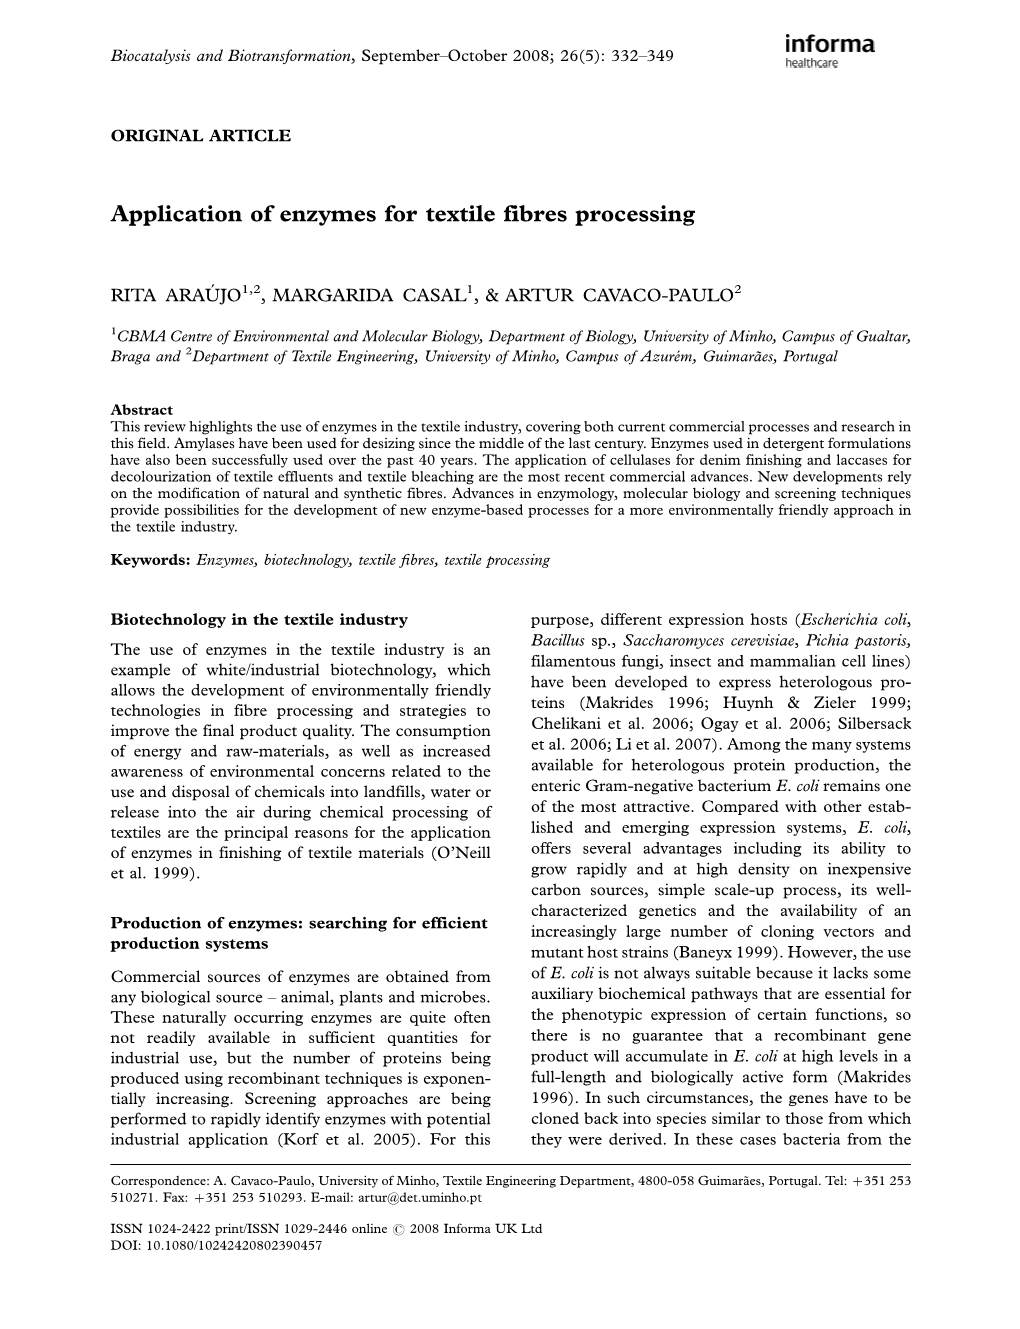 Application of Enzymes for Textile Fibres Processing